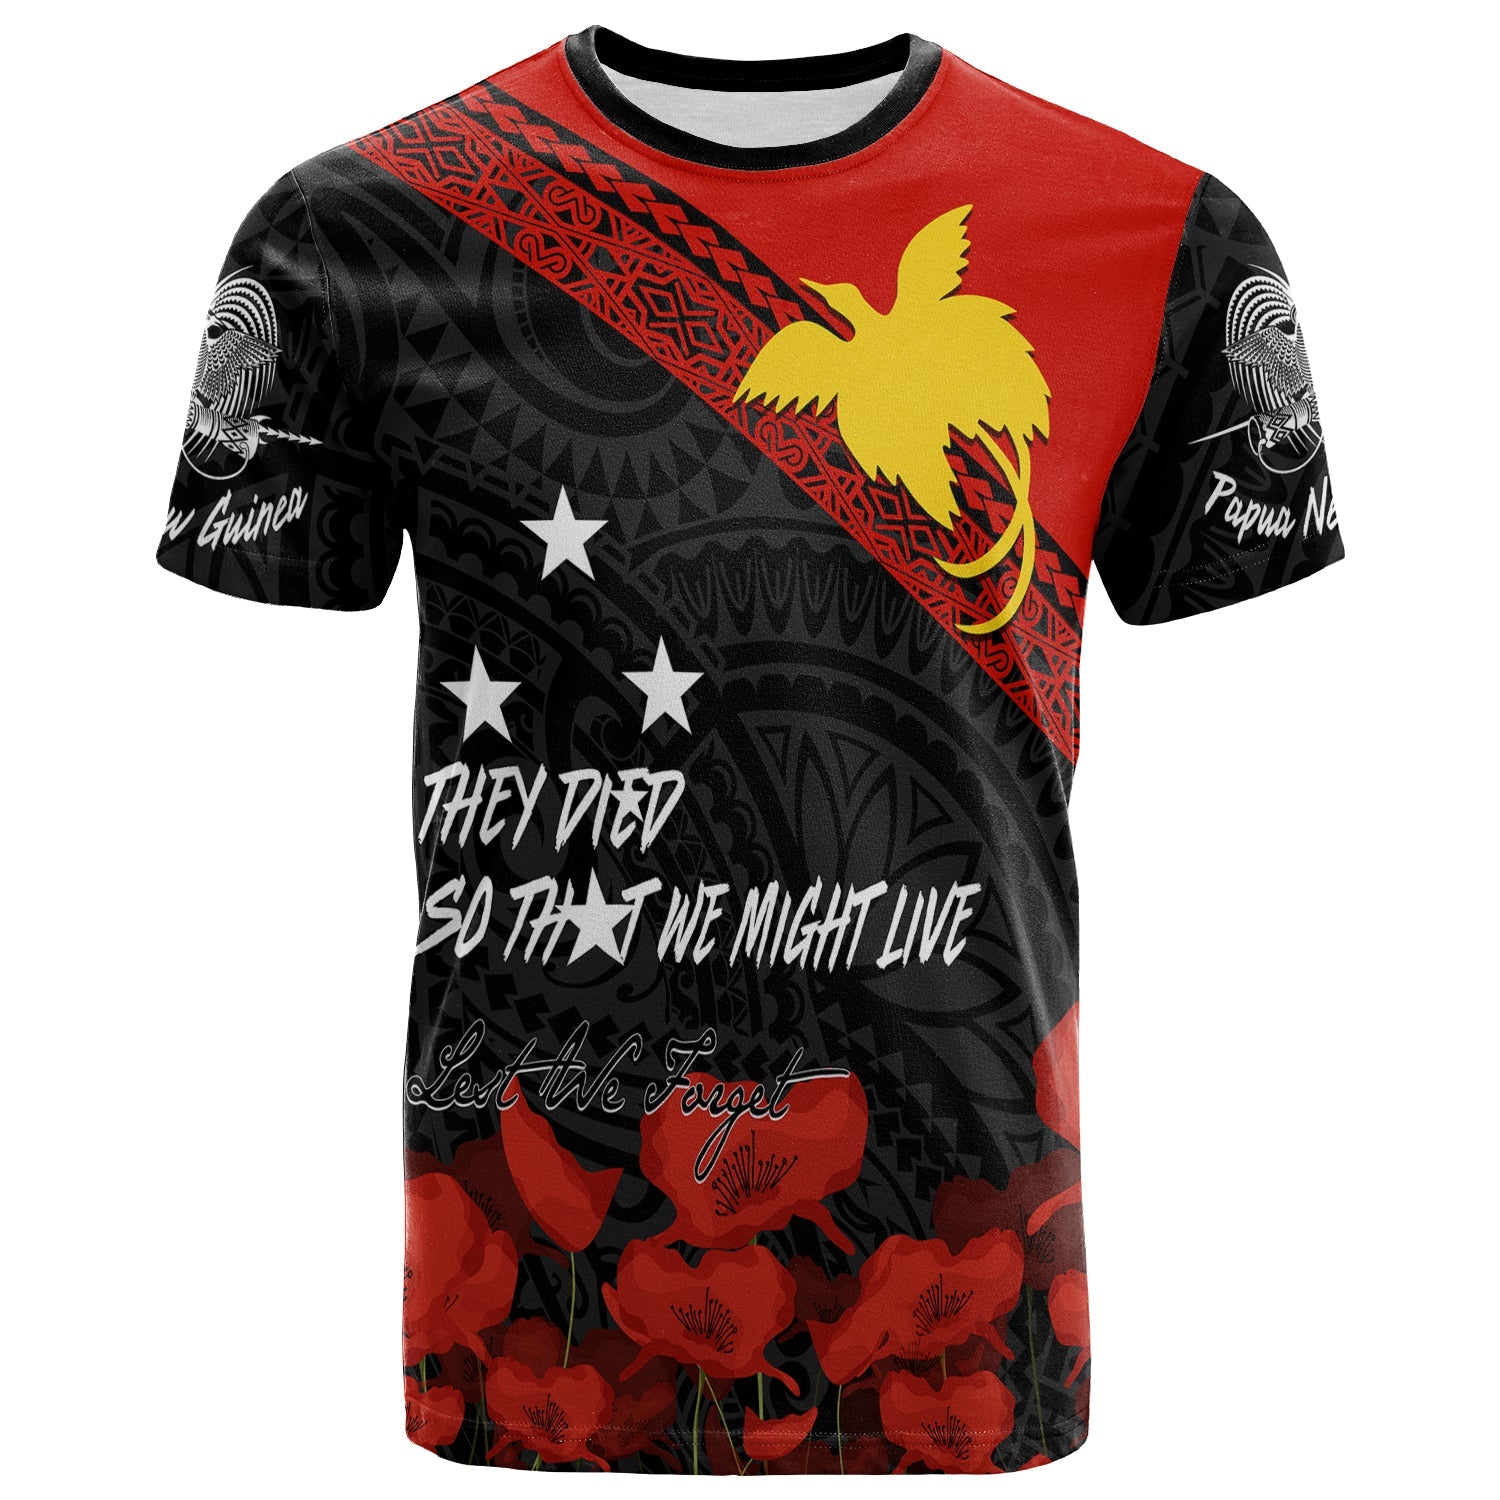 Papua New Guinea T Shirt PNG Remembrance Day LT7 Black - Polynesian Pride